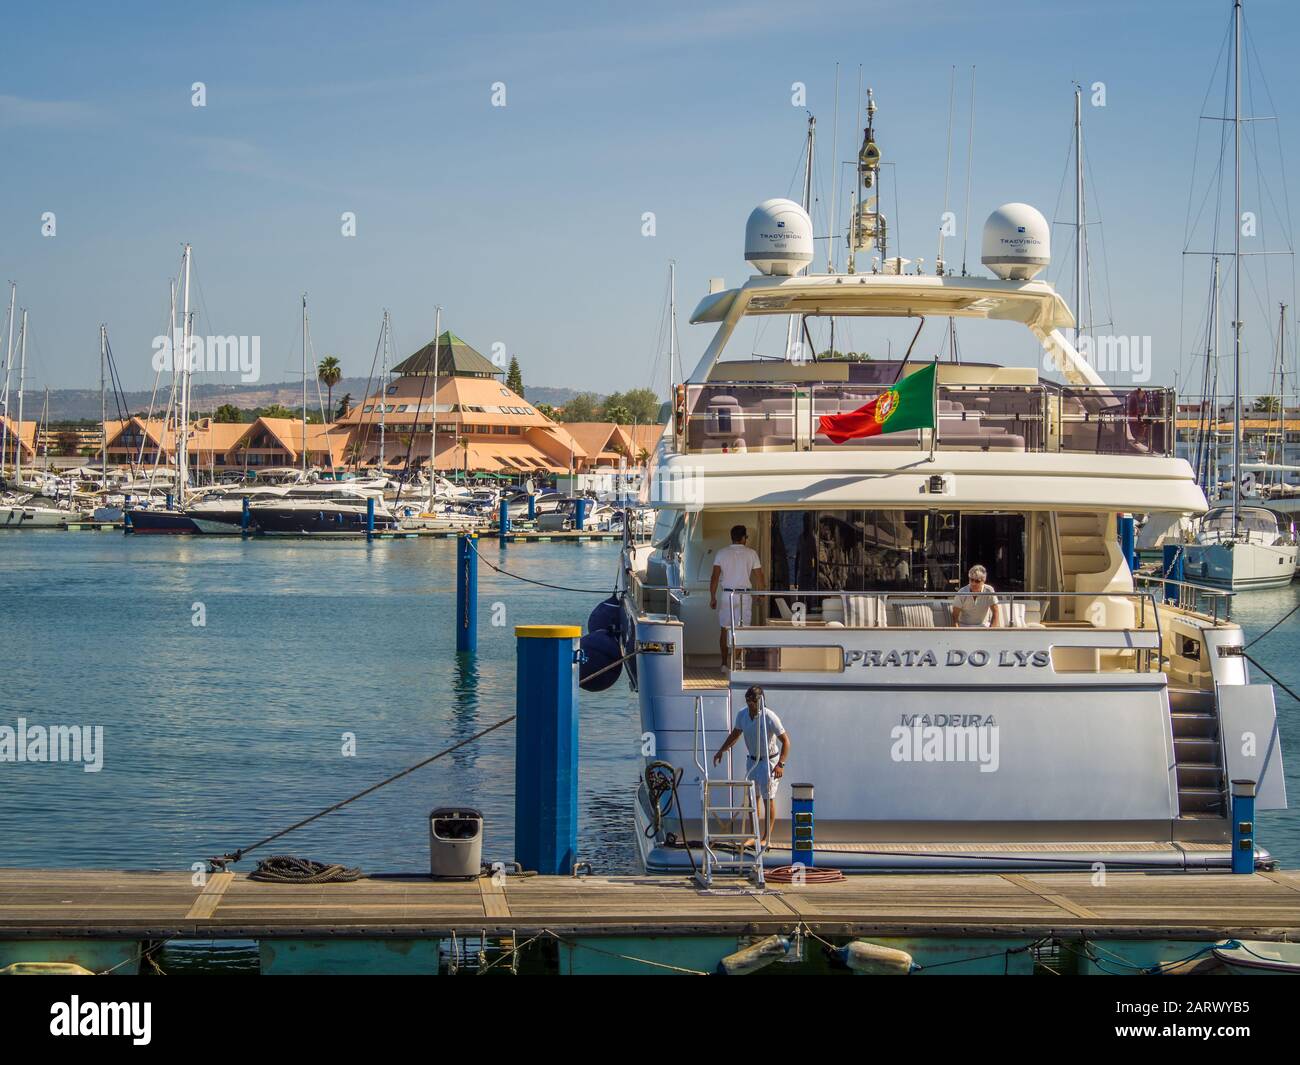 VILAMOURA, PORTUGAL - May 25, 2019: View of yachts in the marina with  buildings to the rear, Vilamoura, Algarve, Portugal Stock Photo - Alamy